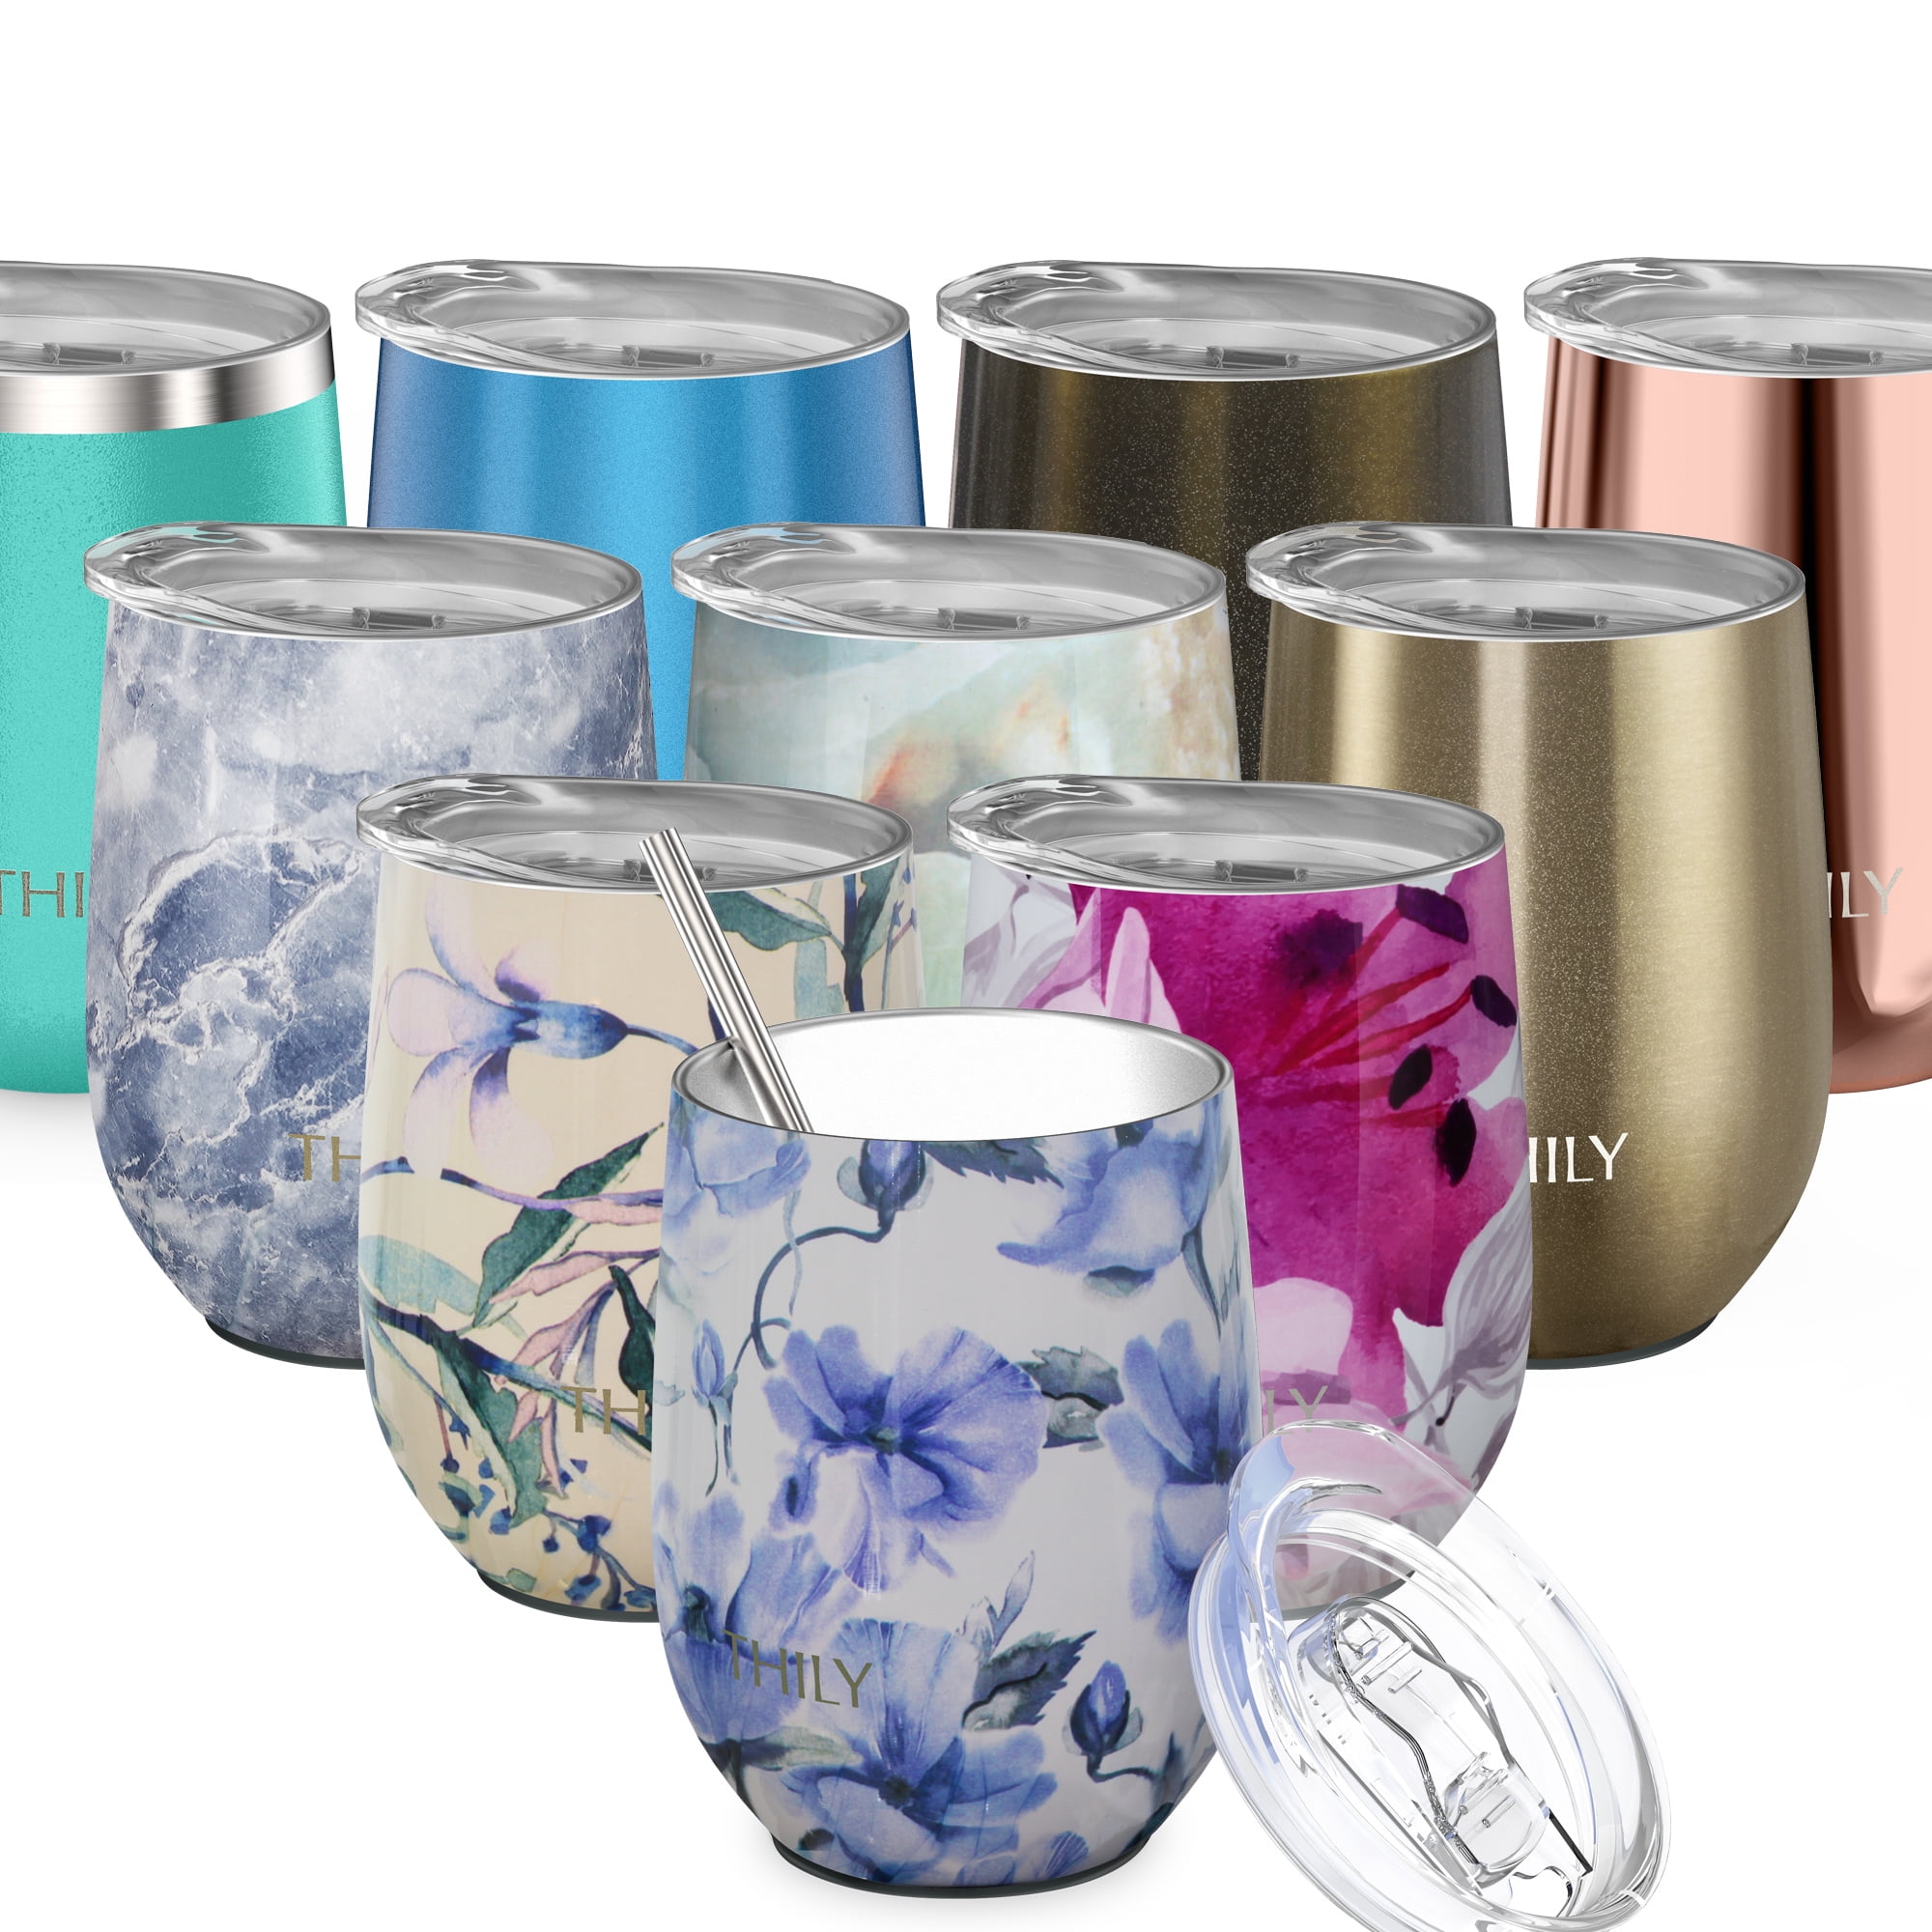 THILY Wine Tumbler丨FAMILY Set 4 PACK丨 Silver by THILY